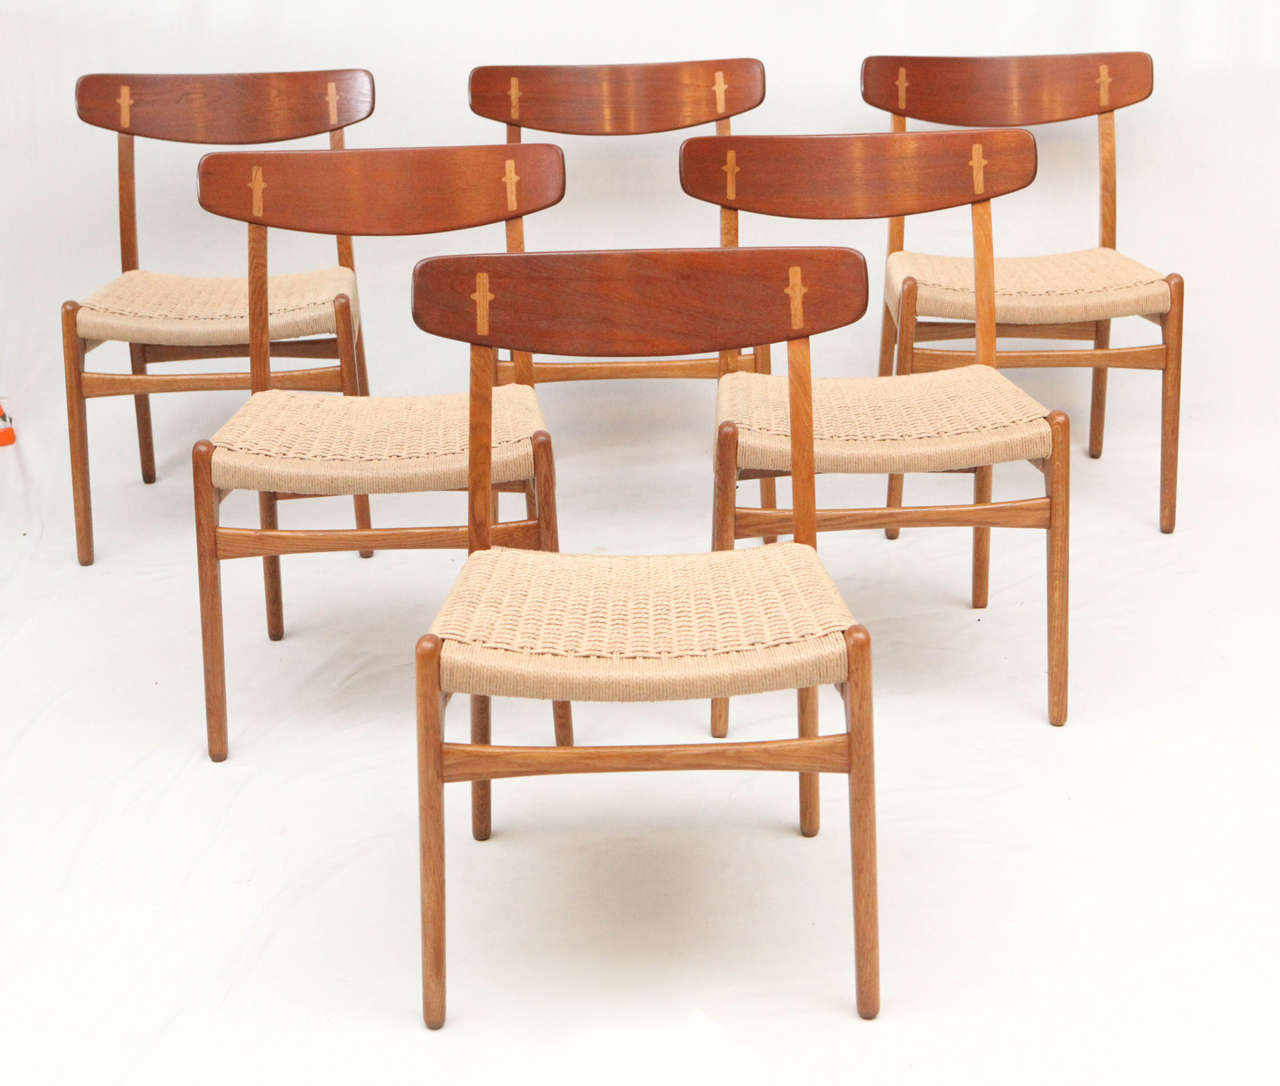 Set of six Hans Wegner CH 23 dining chairs designed in 1951 and produced by Carl Hansen & Son.